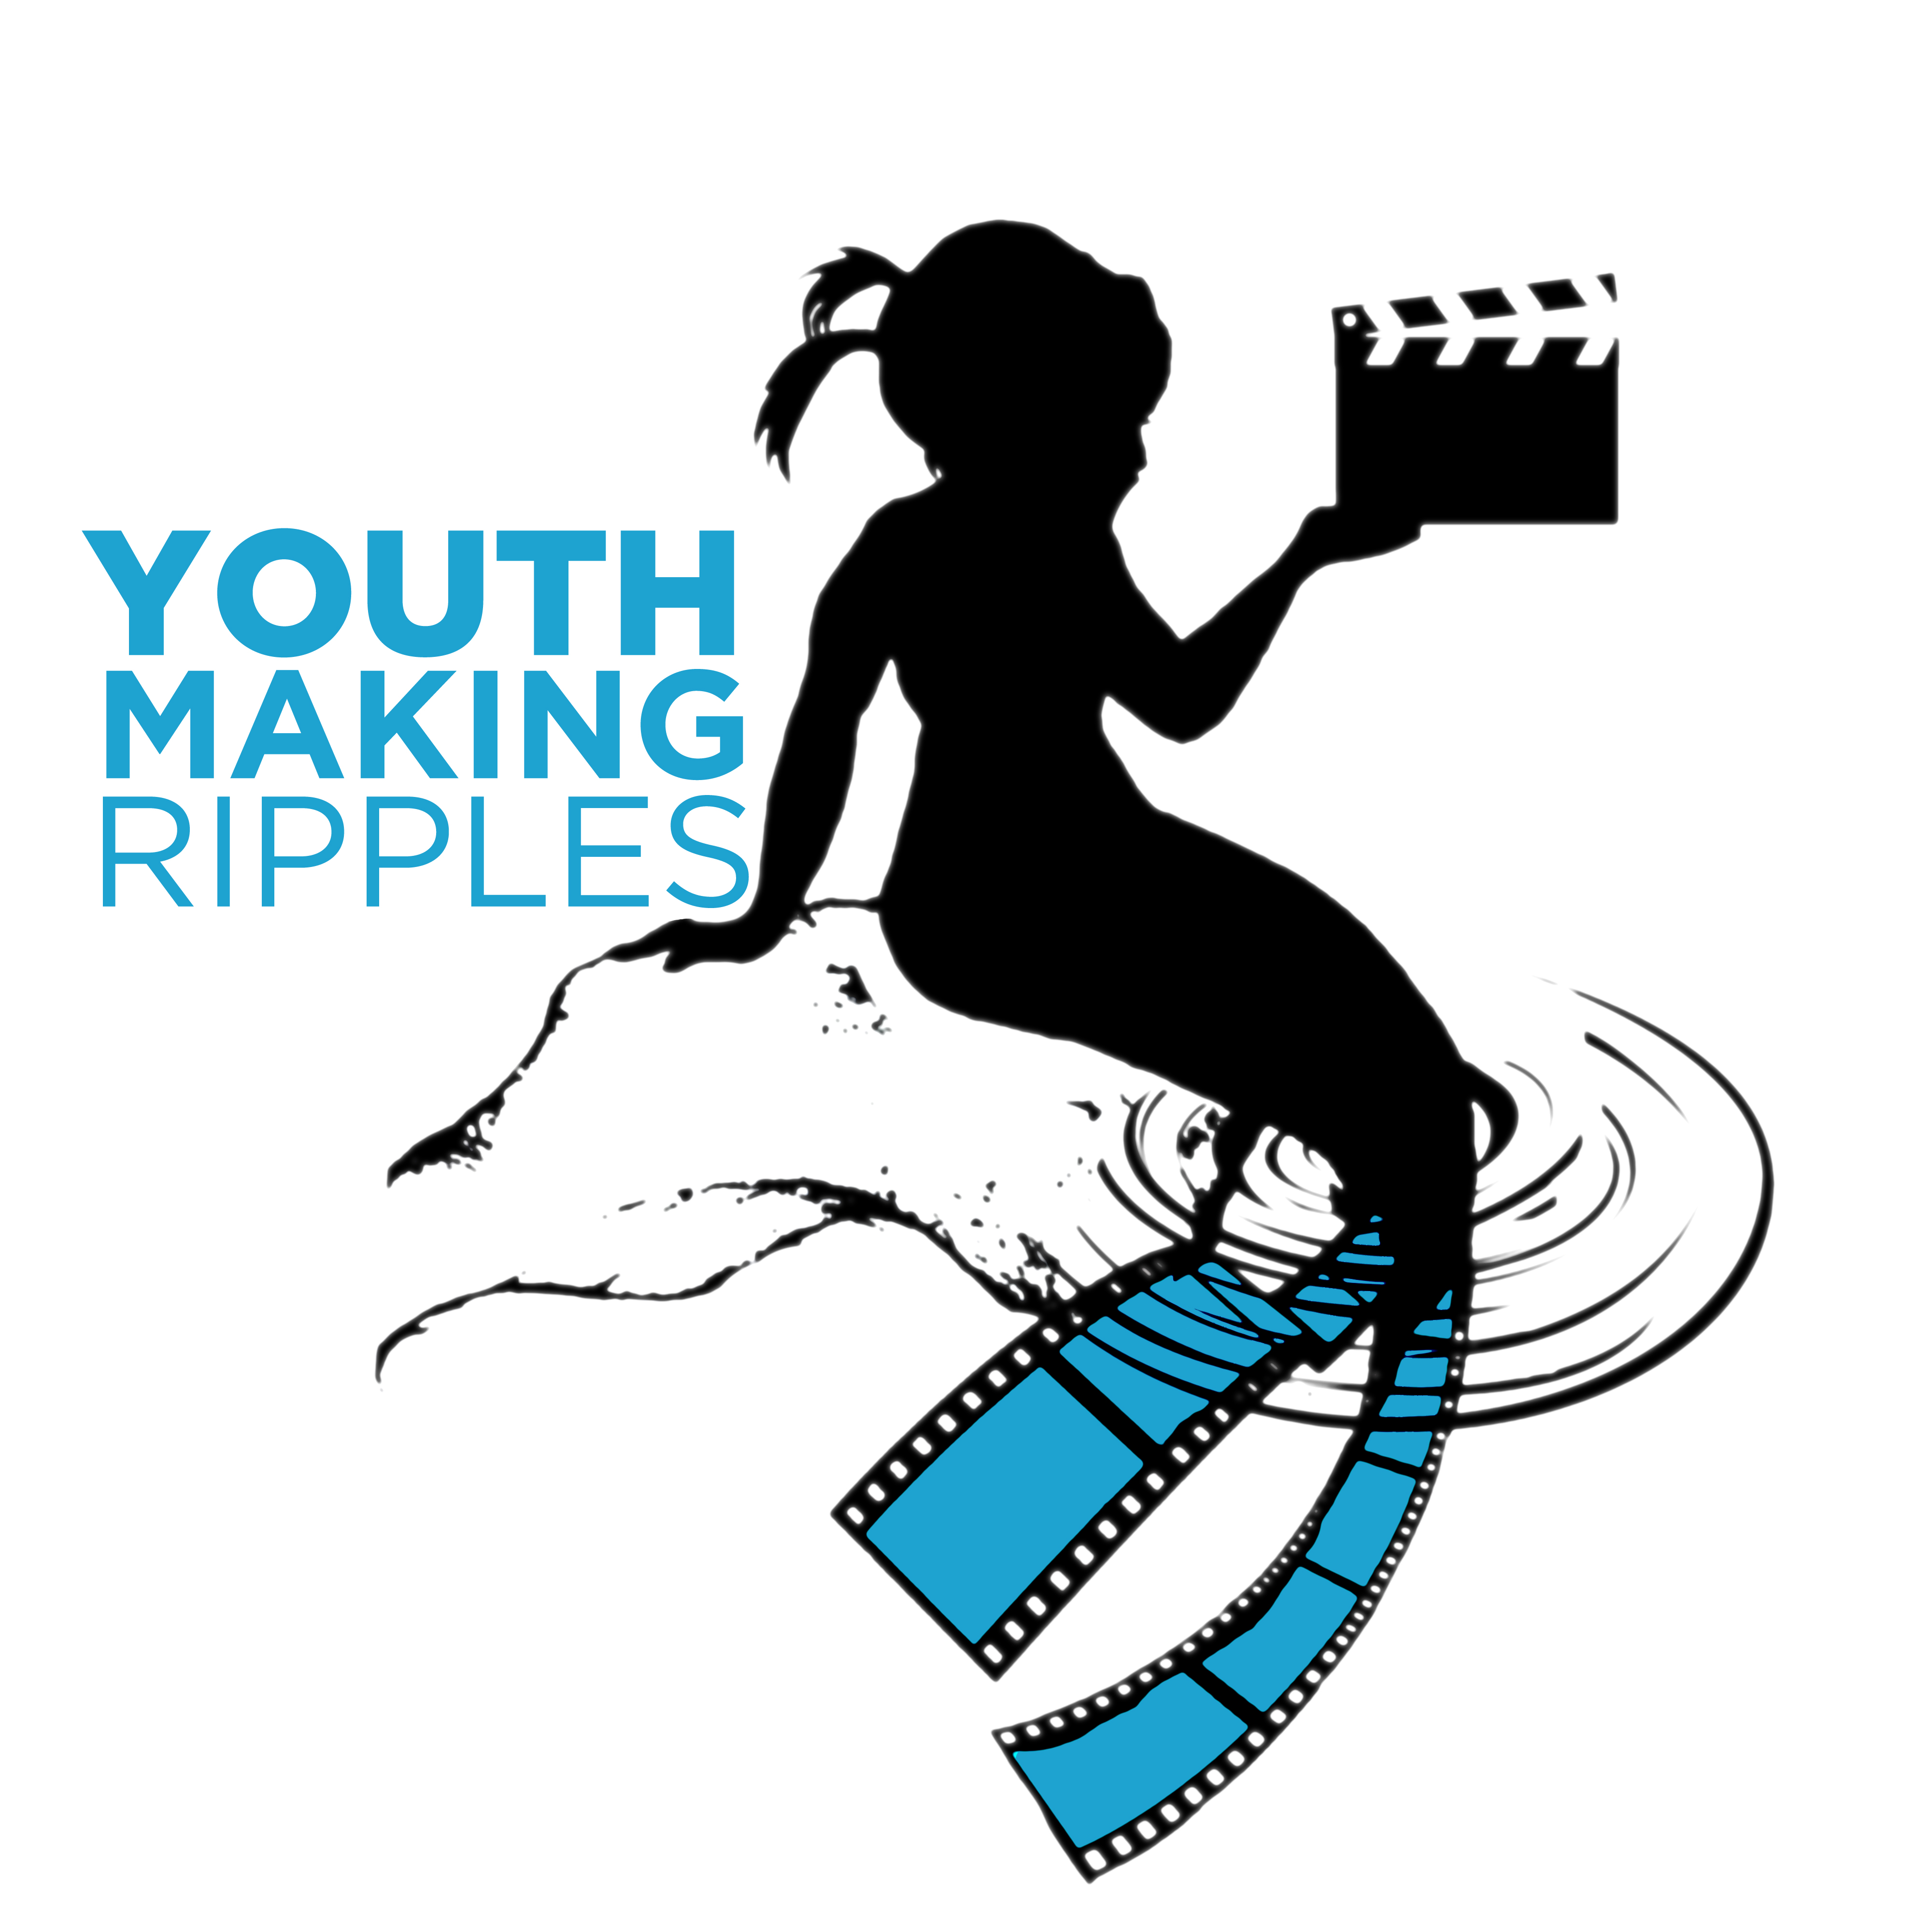 Youth Making Ripples